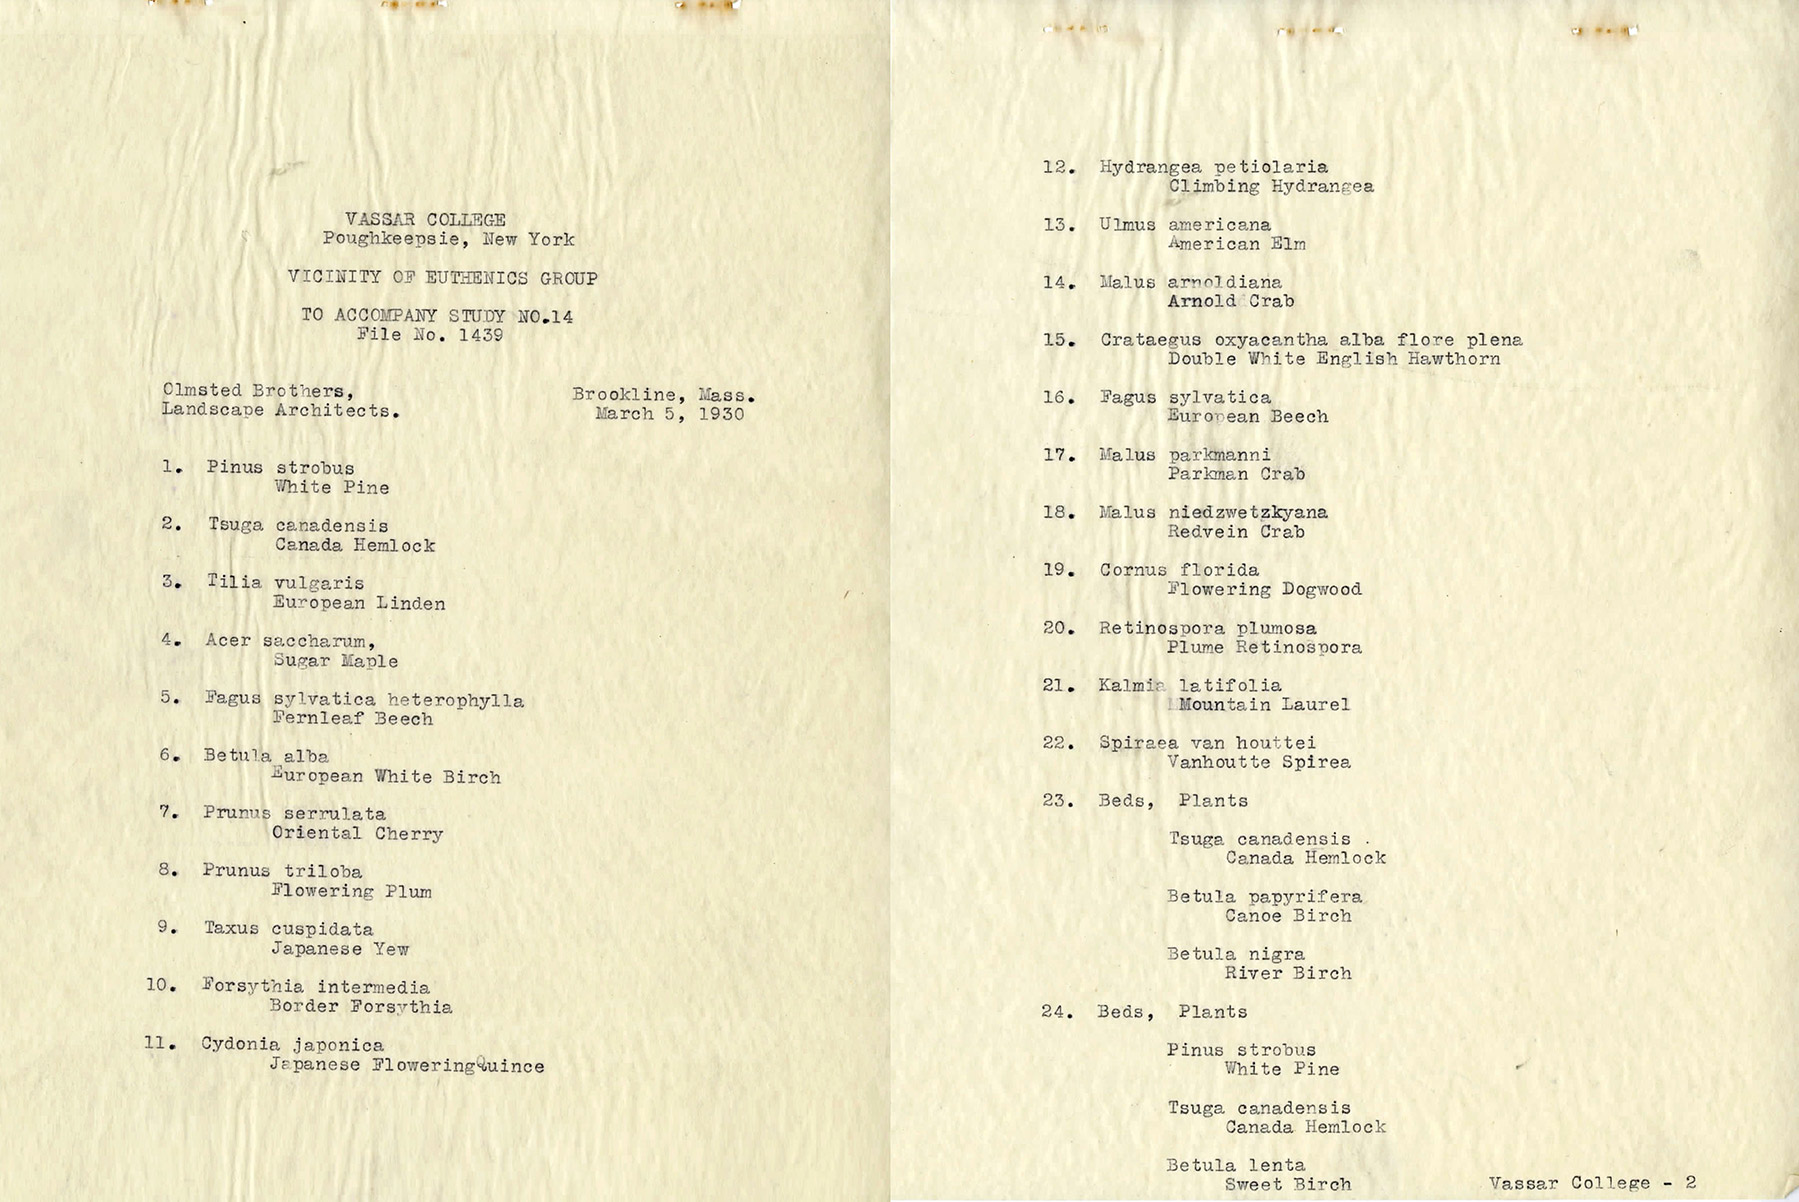 Olmsted Brothers, Planting List for the vicinity of Blodgett Hall, March 5, 1930. (United States Department of the Interior, National Park Service, Frederick Law Olmsted National Historic Site, 1439-02-01).